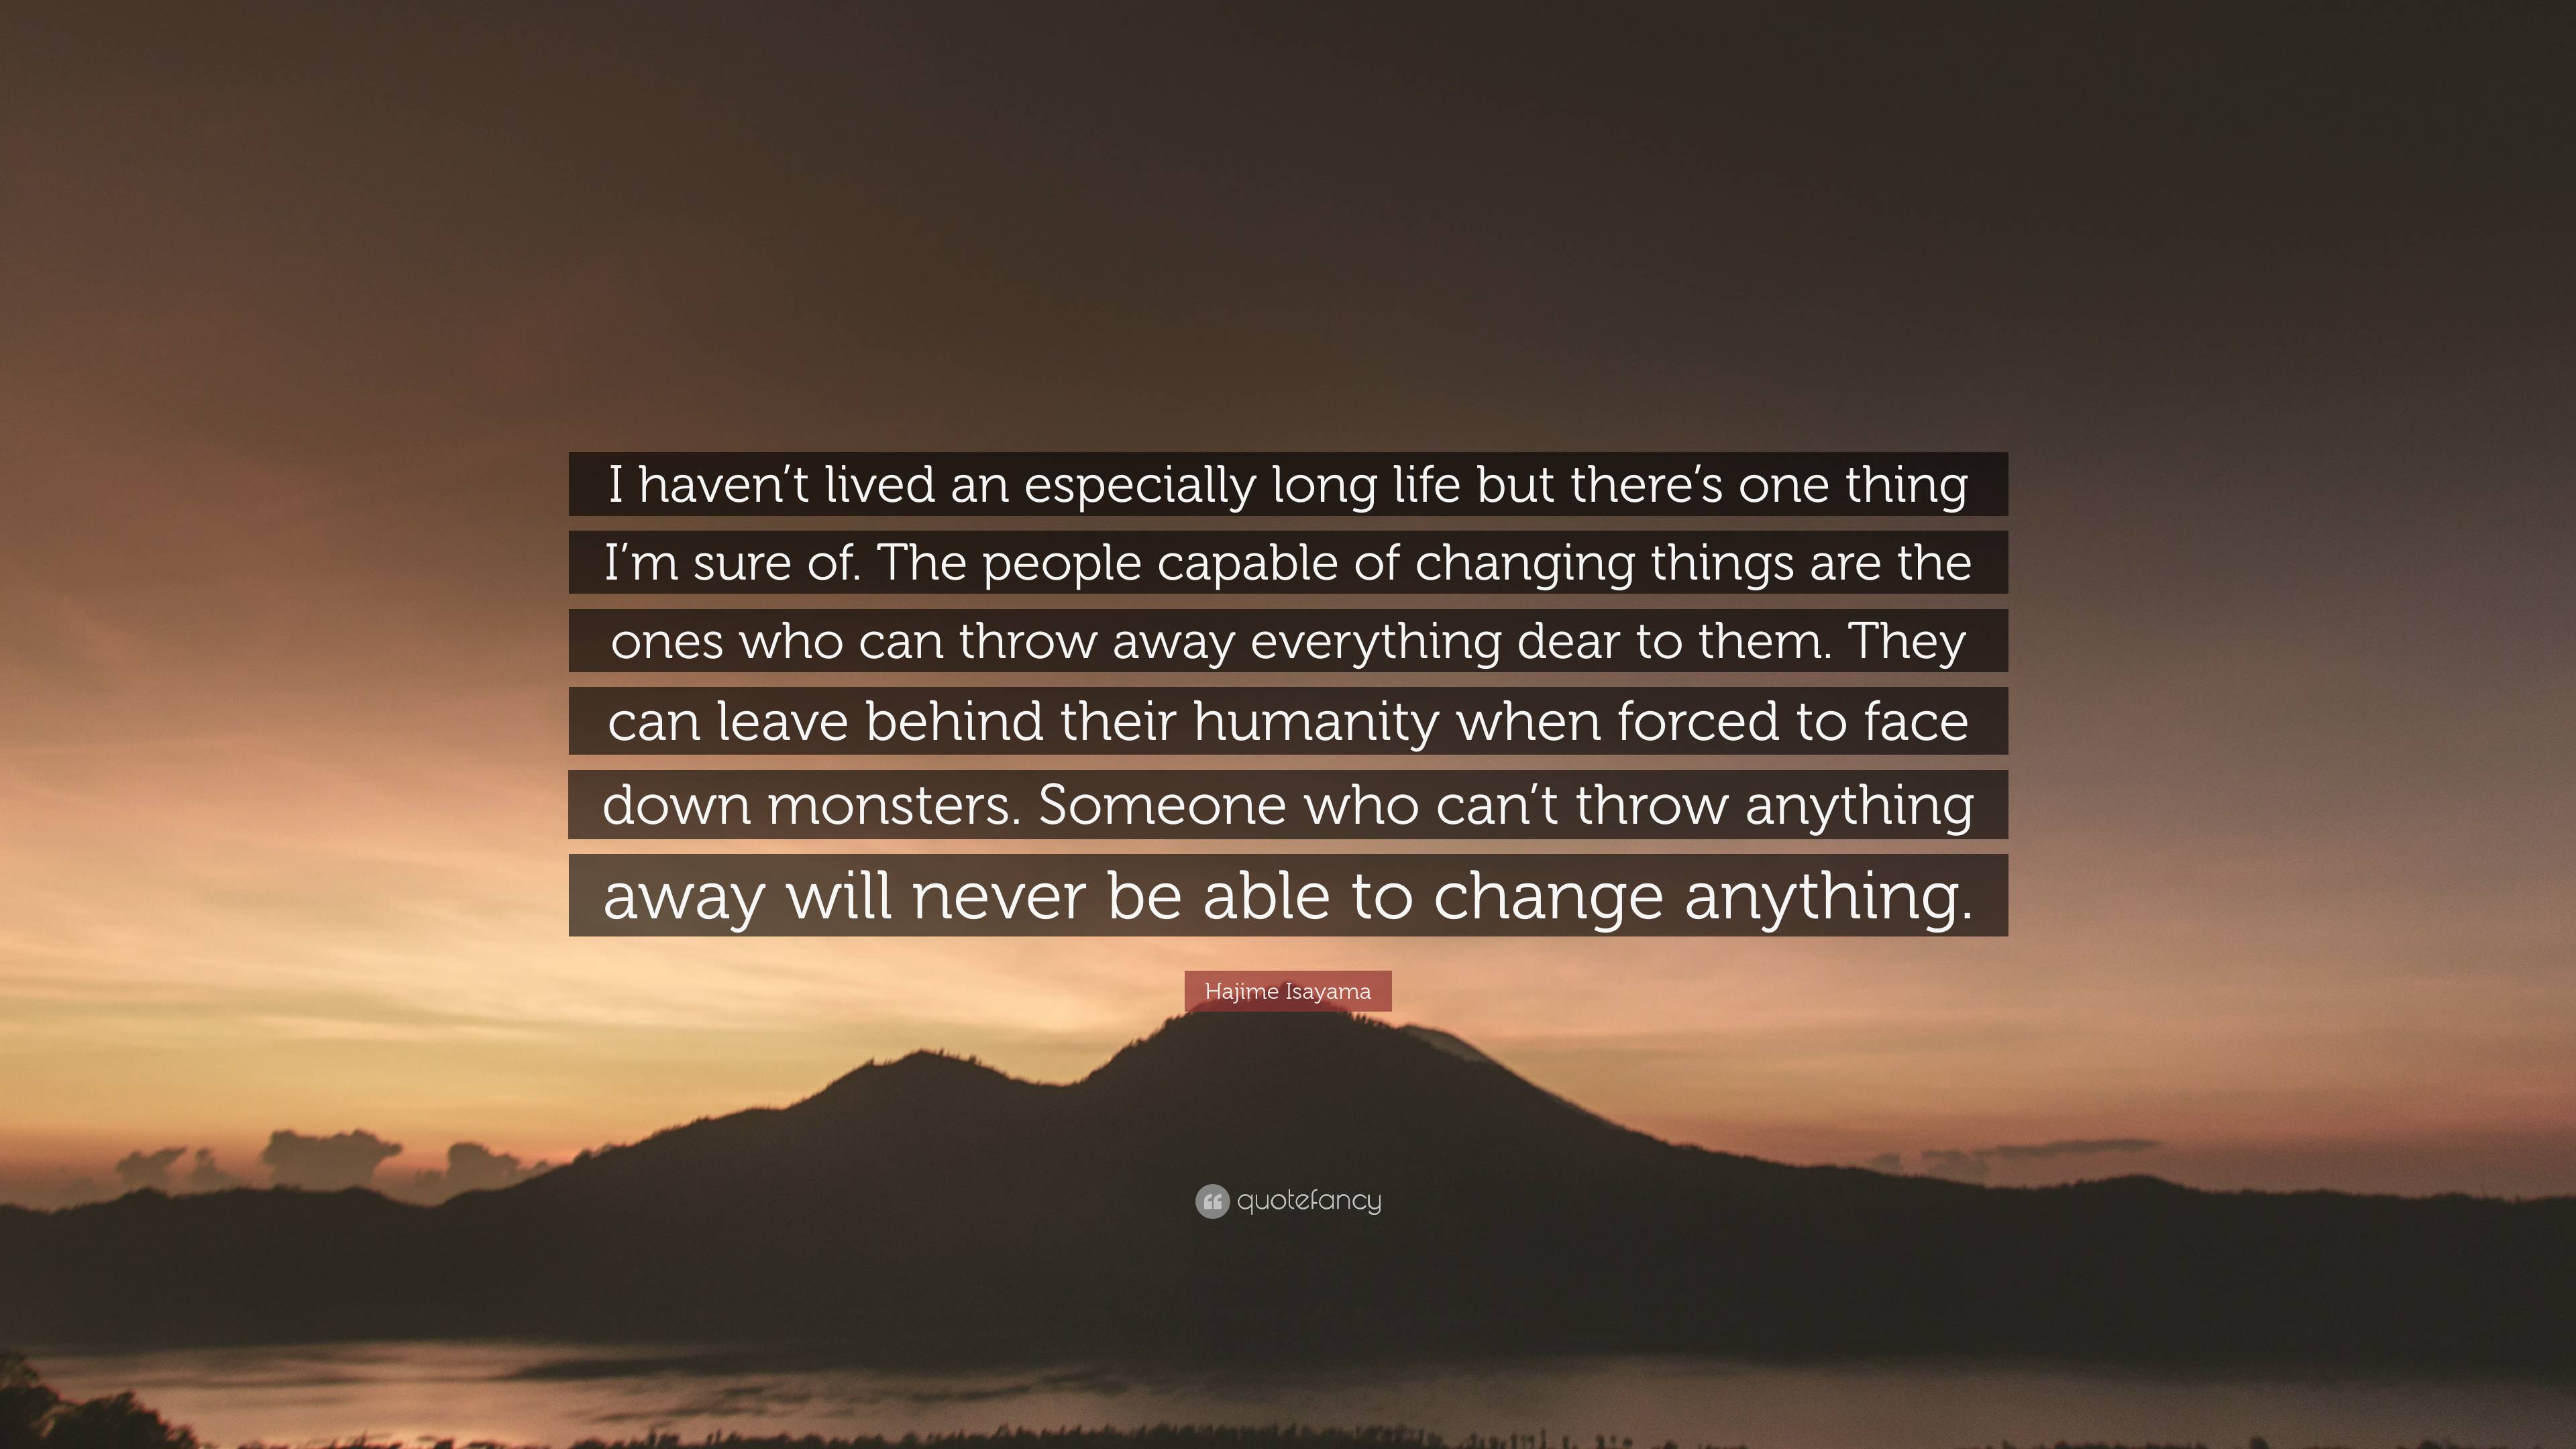 Hajime Isayama Quote: “I haven’t lived an especially long life but ...